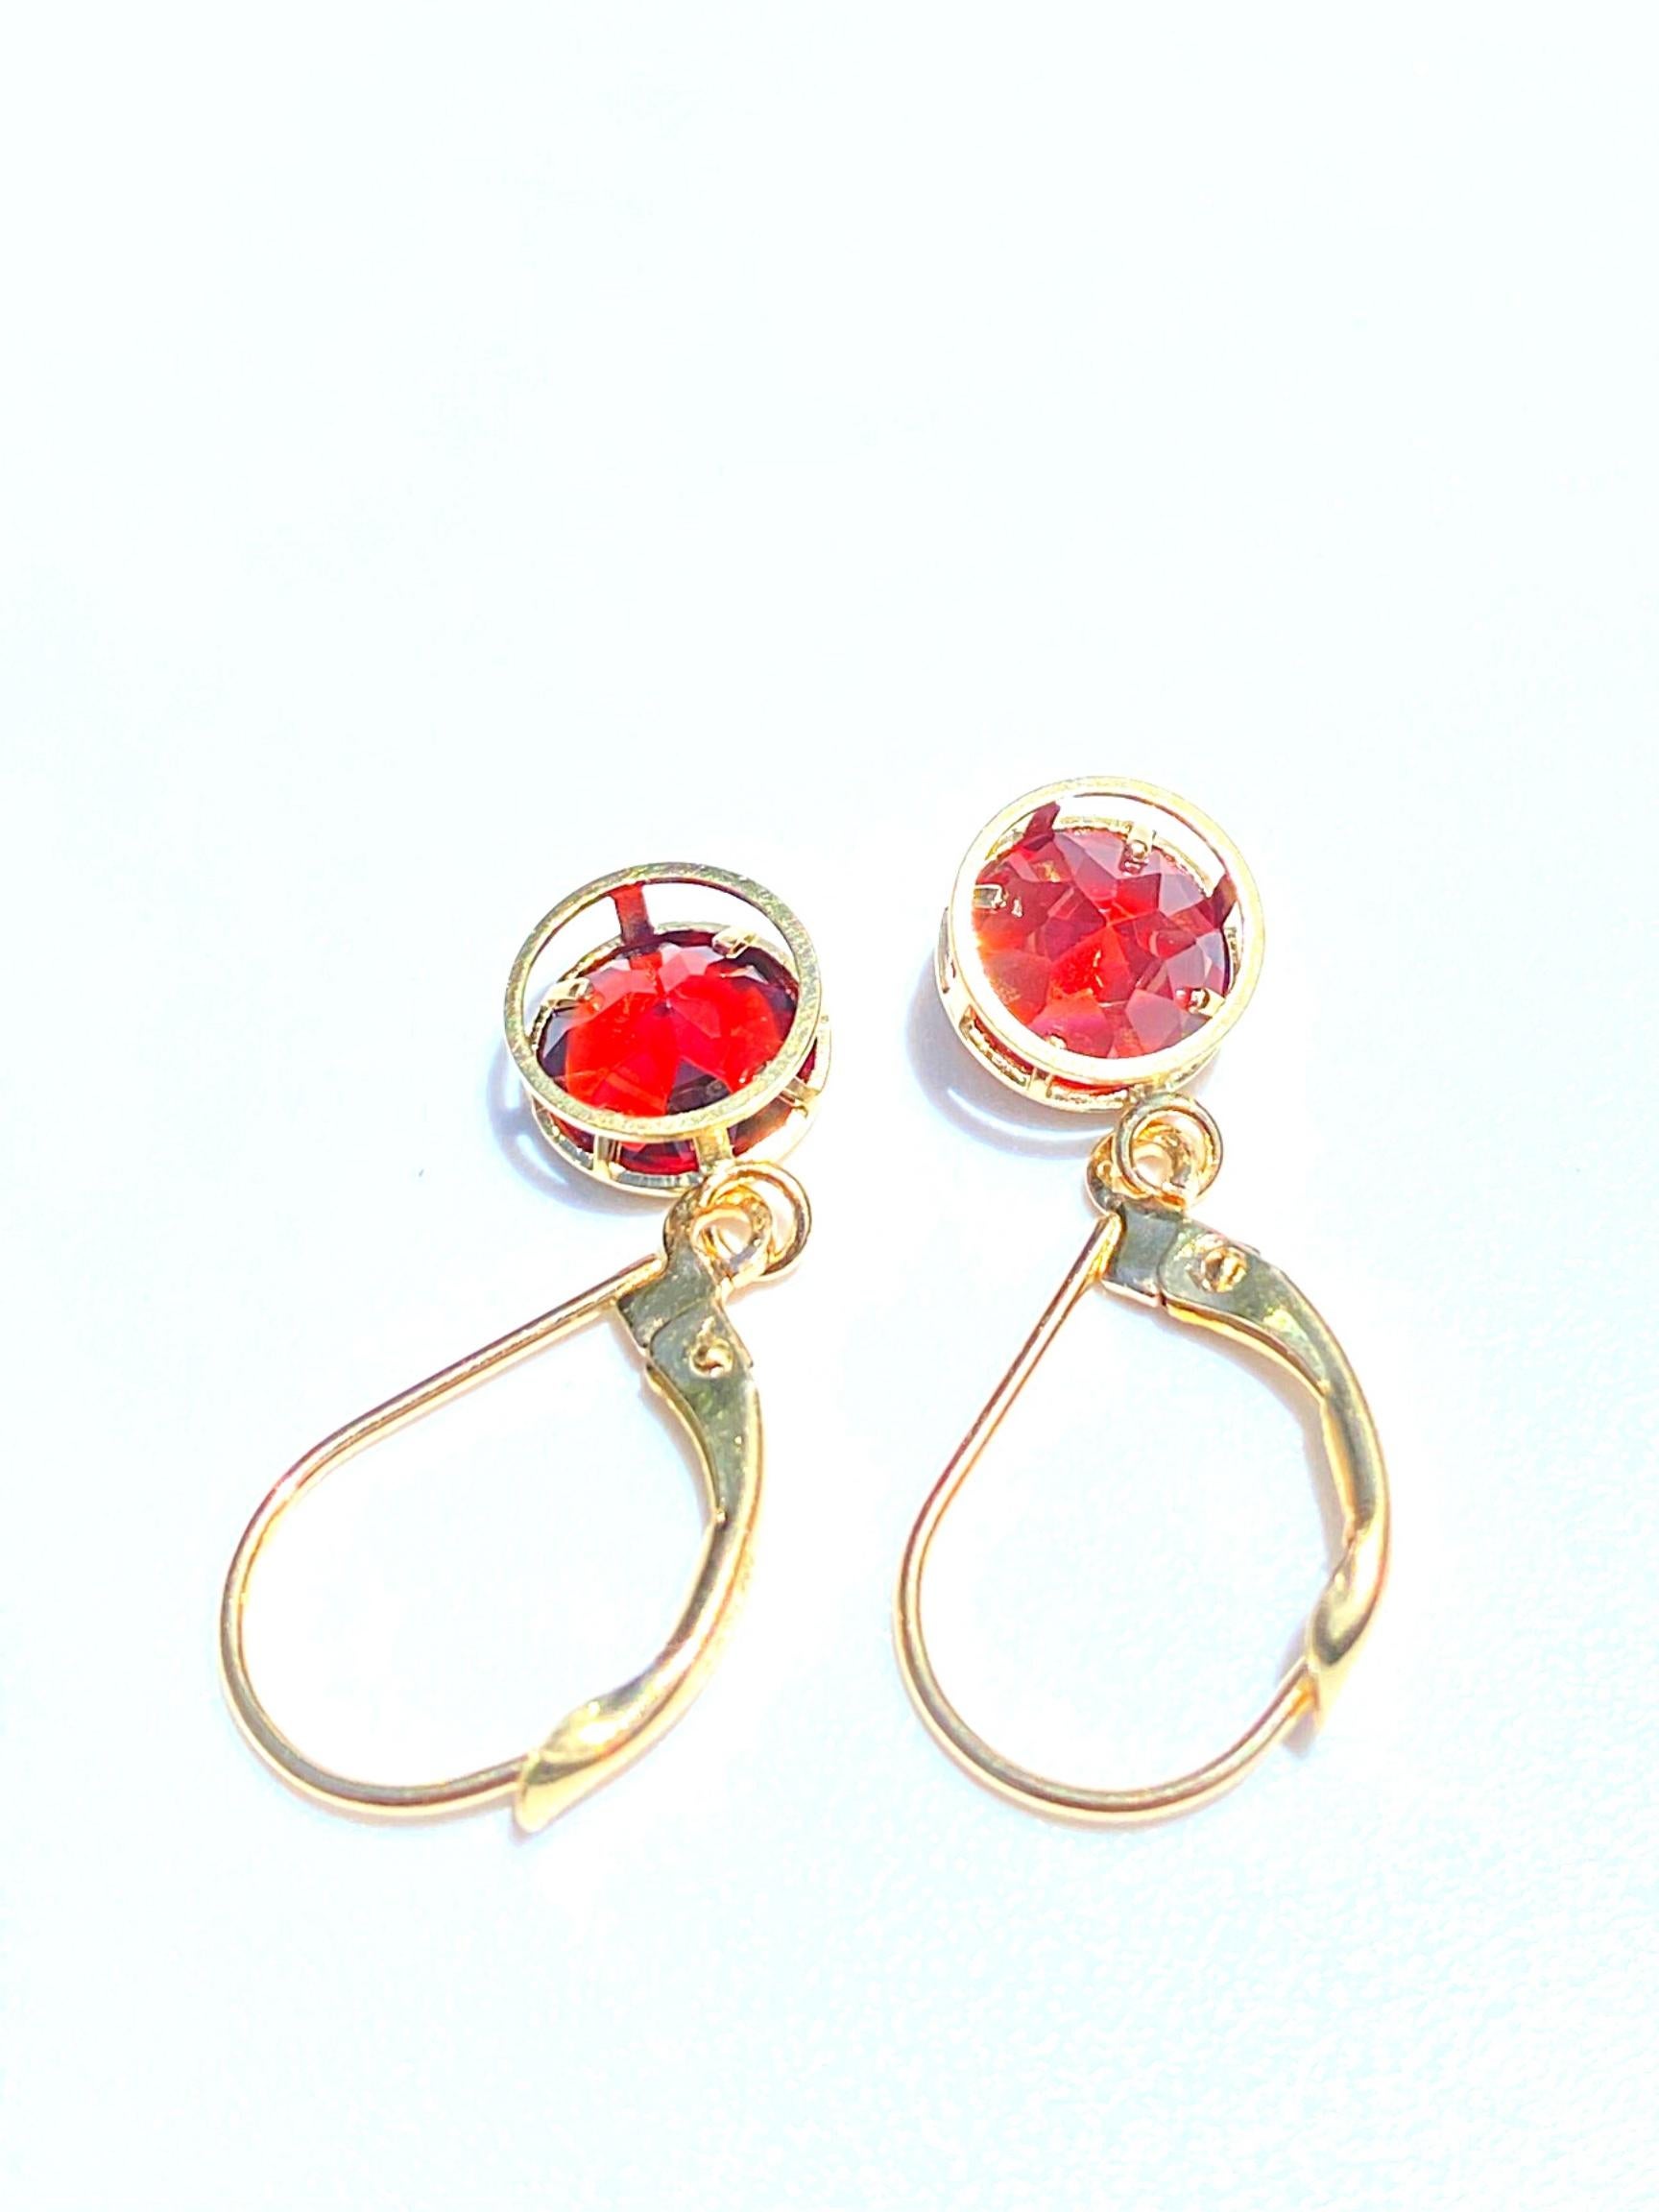 Women's or Men's 2.00 Carat Round-Brilliant Cut Red Garnet and 14K Yellow Gold Earrings For Sale